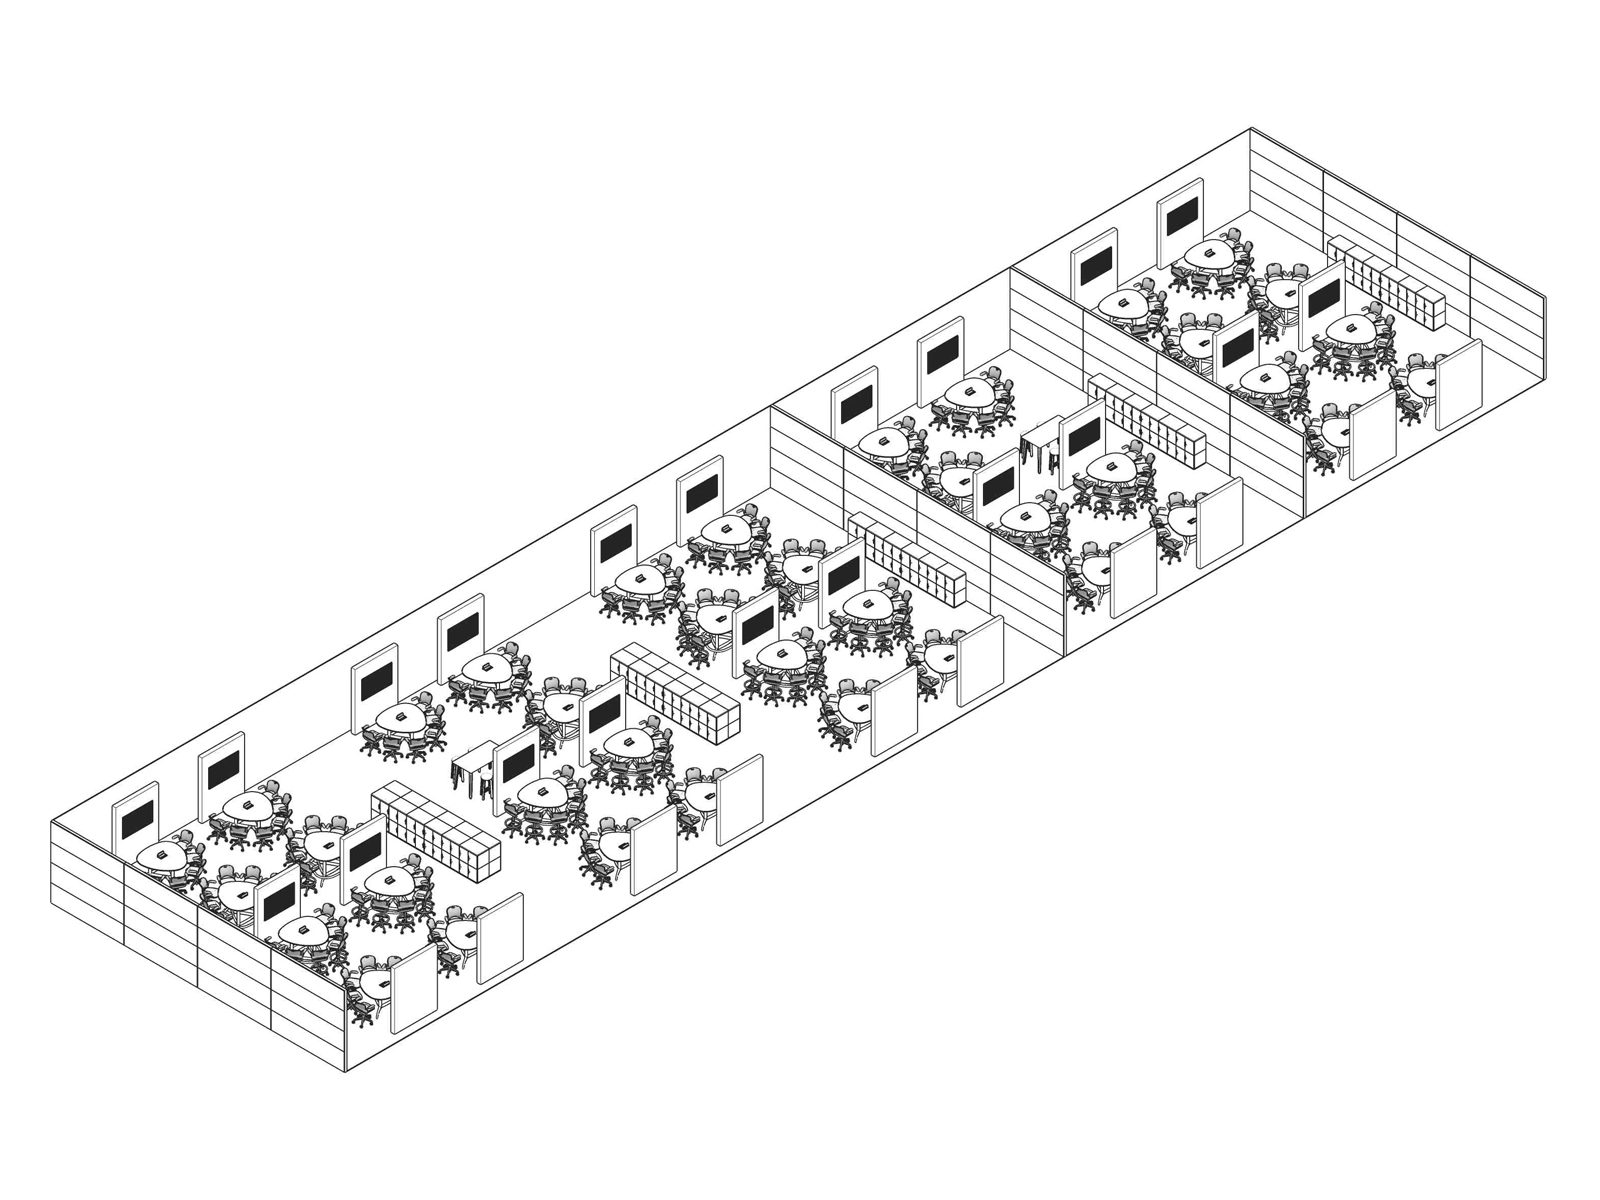 A line drawing - Classroom 006